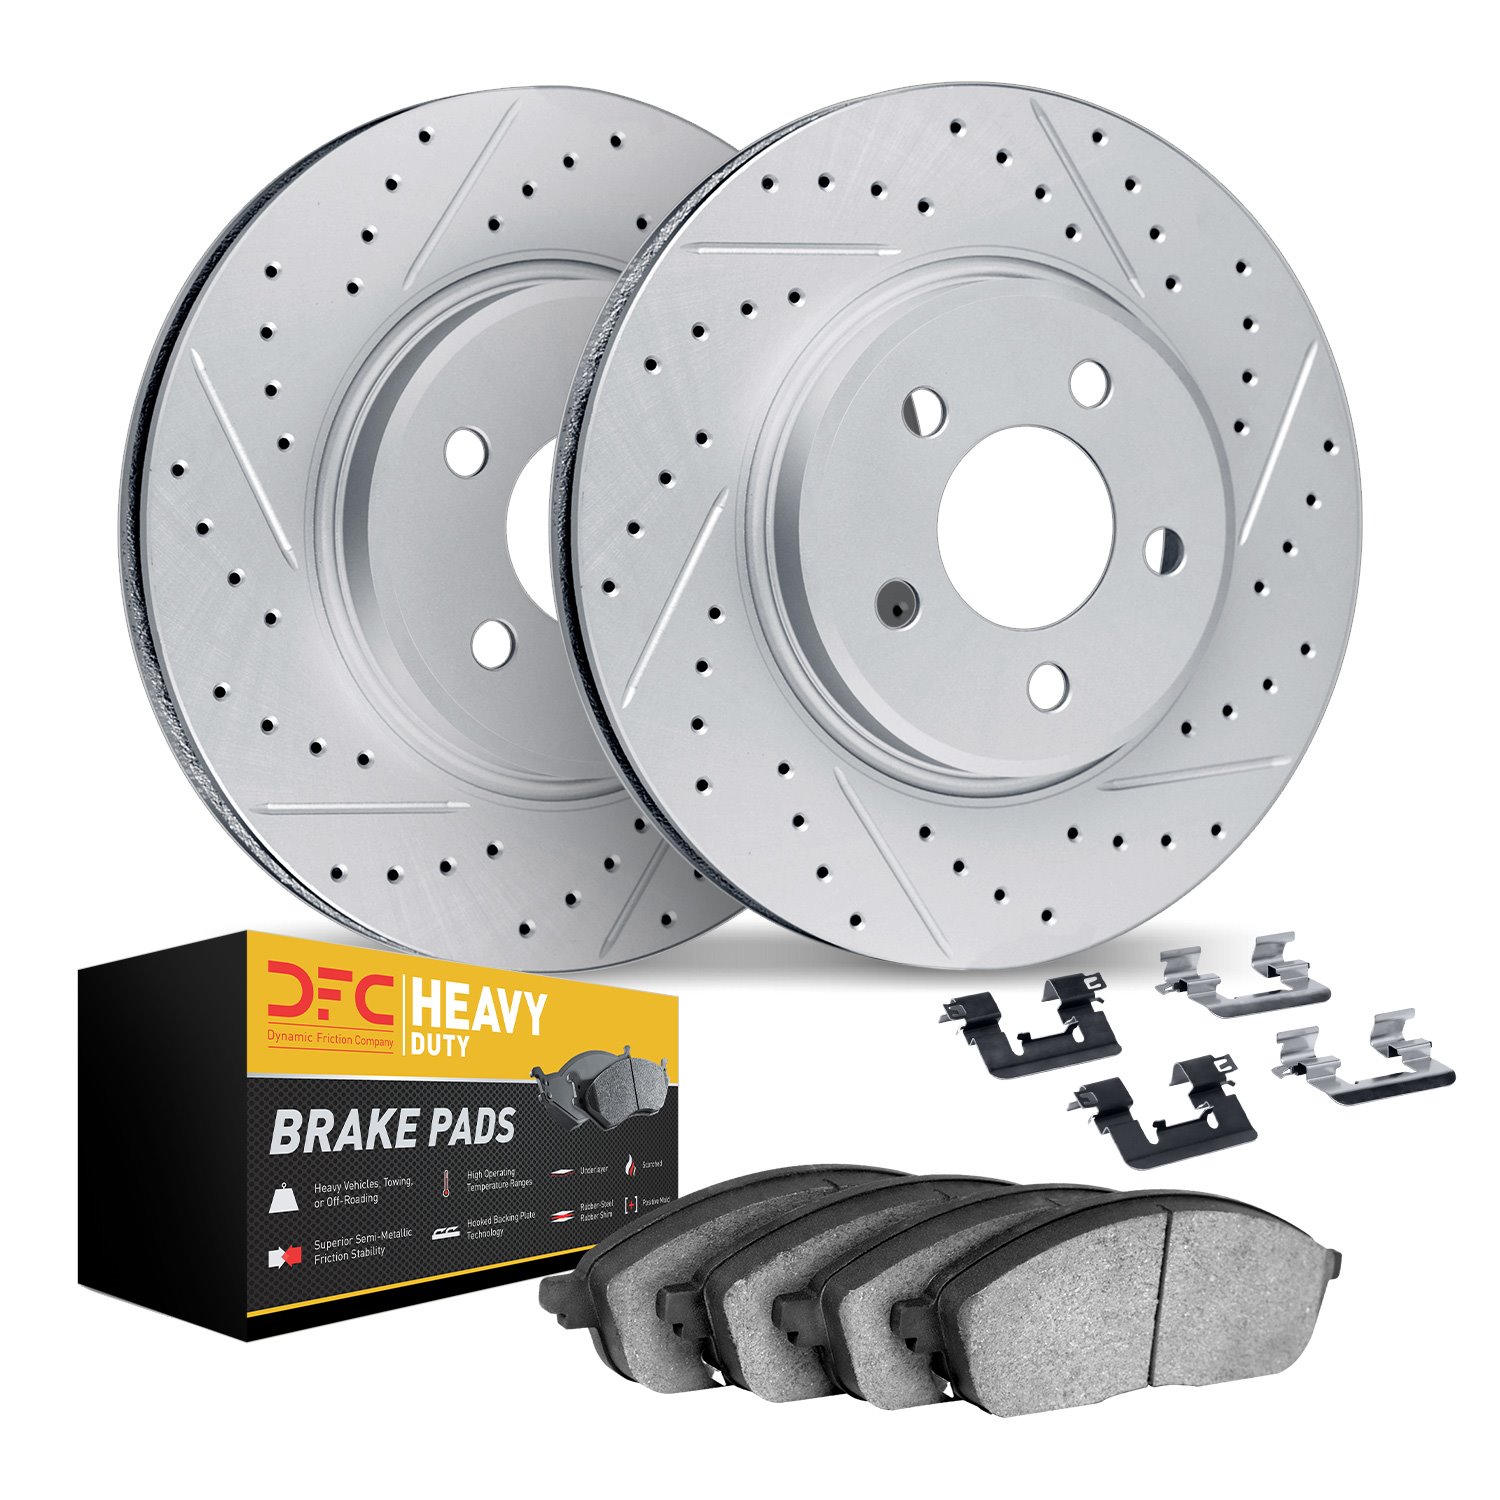 2212-99051 Geoperformance Drilled/Slotted Rotors w/Heavy-Duty Pads Kit & Hardware, 1999-2003 Ford/Lincoln/Mercury/Mazda, Positio